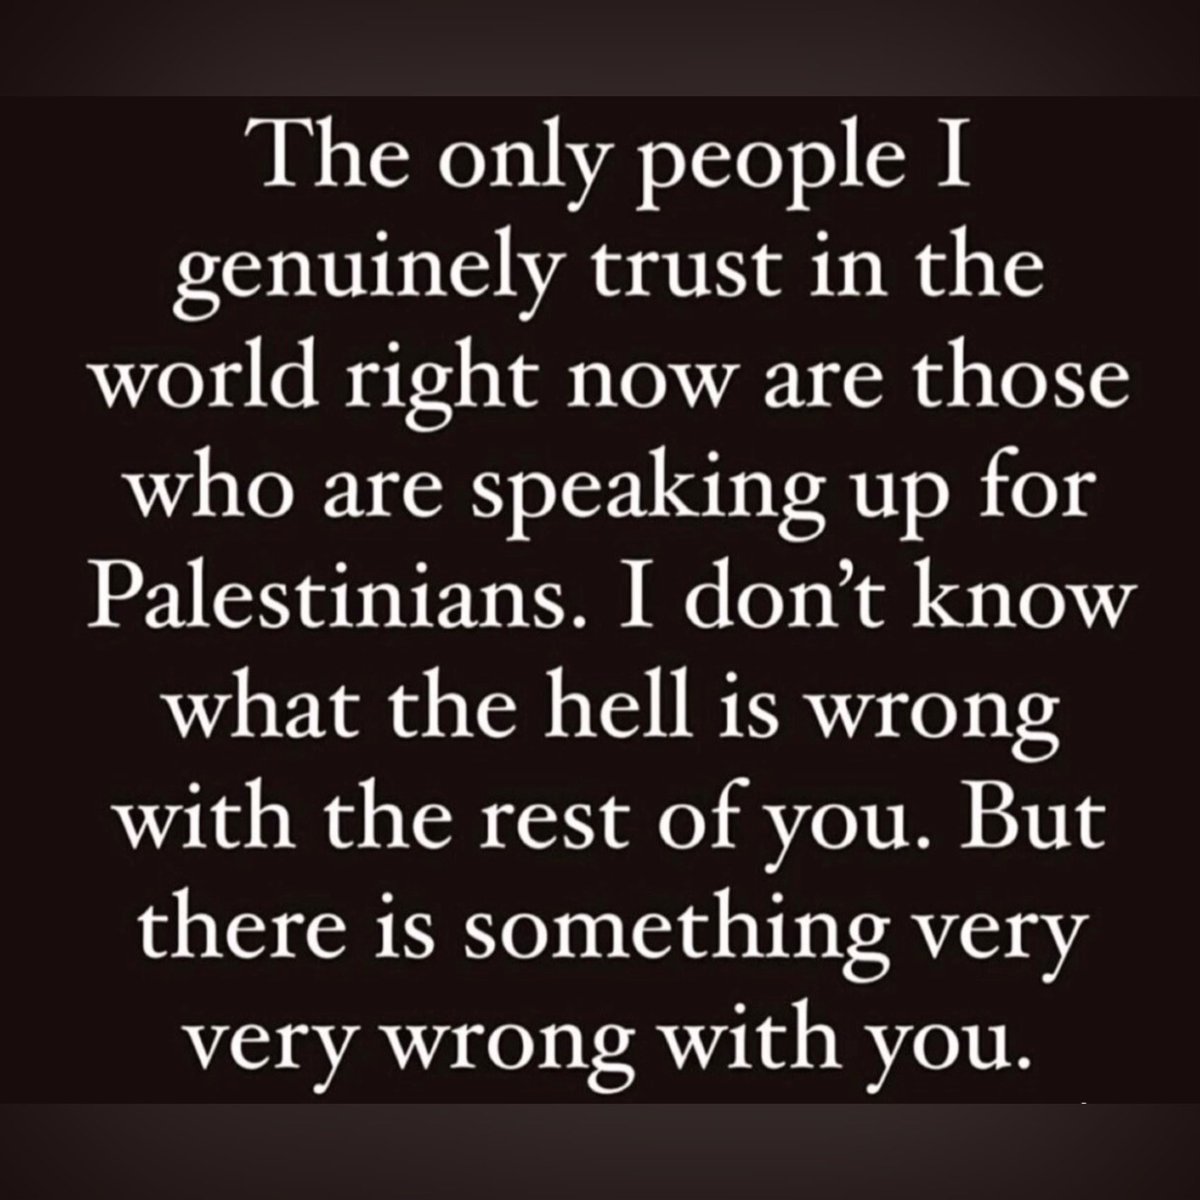 Grateful that we have each other, even though we don’t really know each other… 
… we are the same ♥️🕊️🇵🇸

#WeAreAllConnected 
#PalestinaNoEstaSola